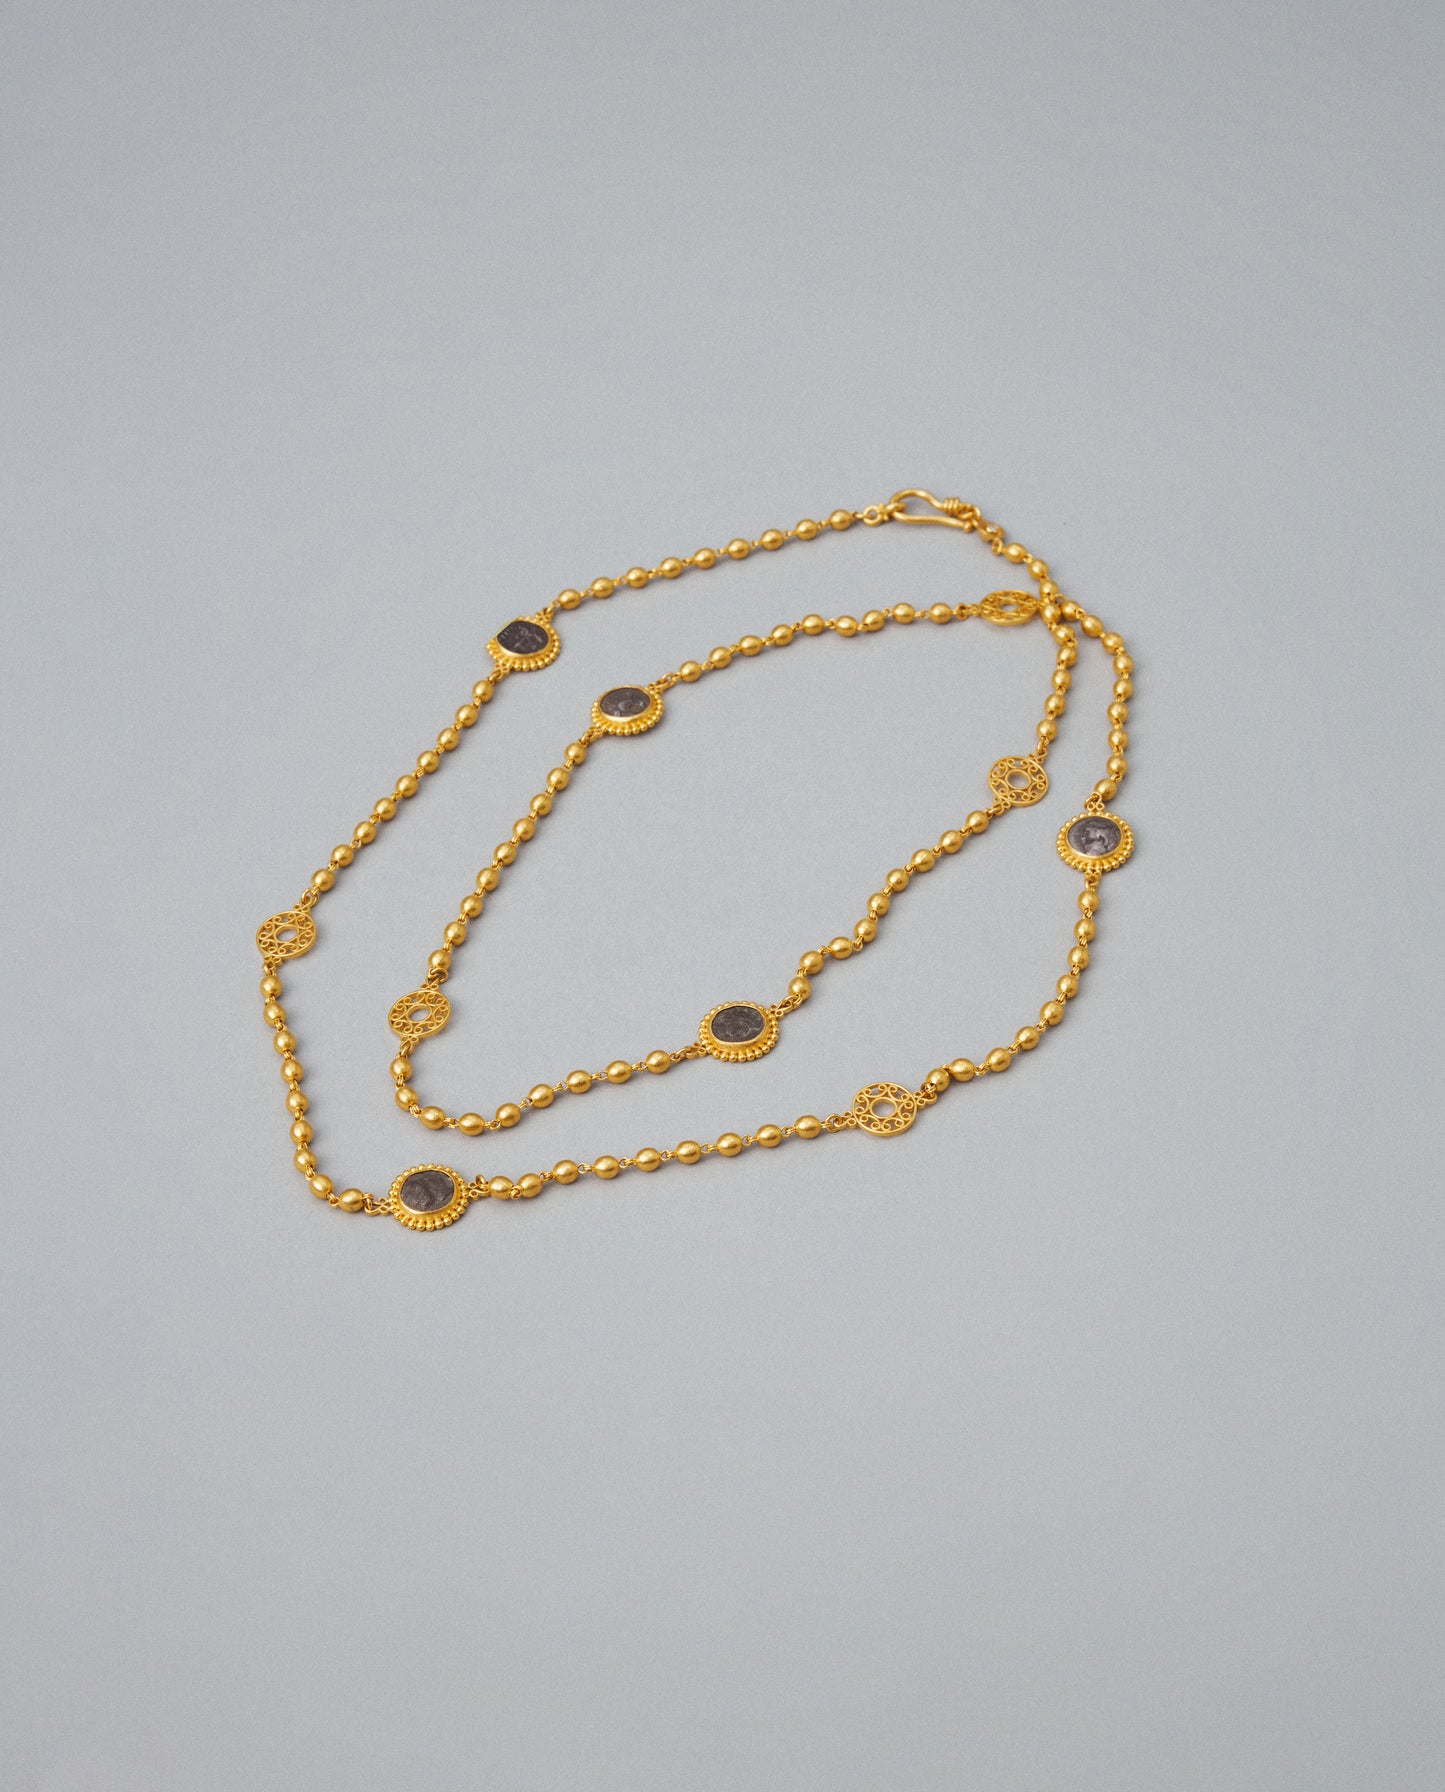 The Chora Necklace with Ancient Coins